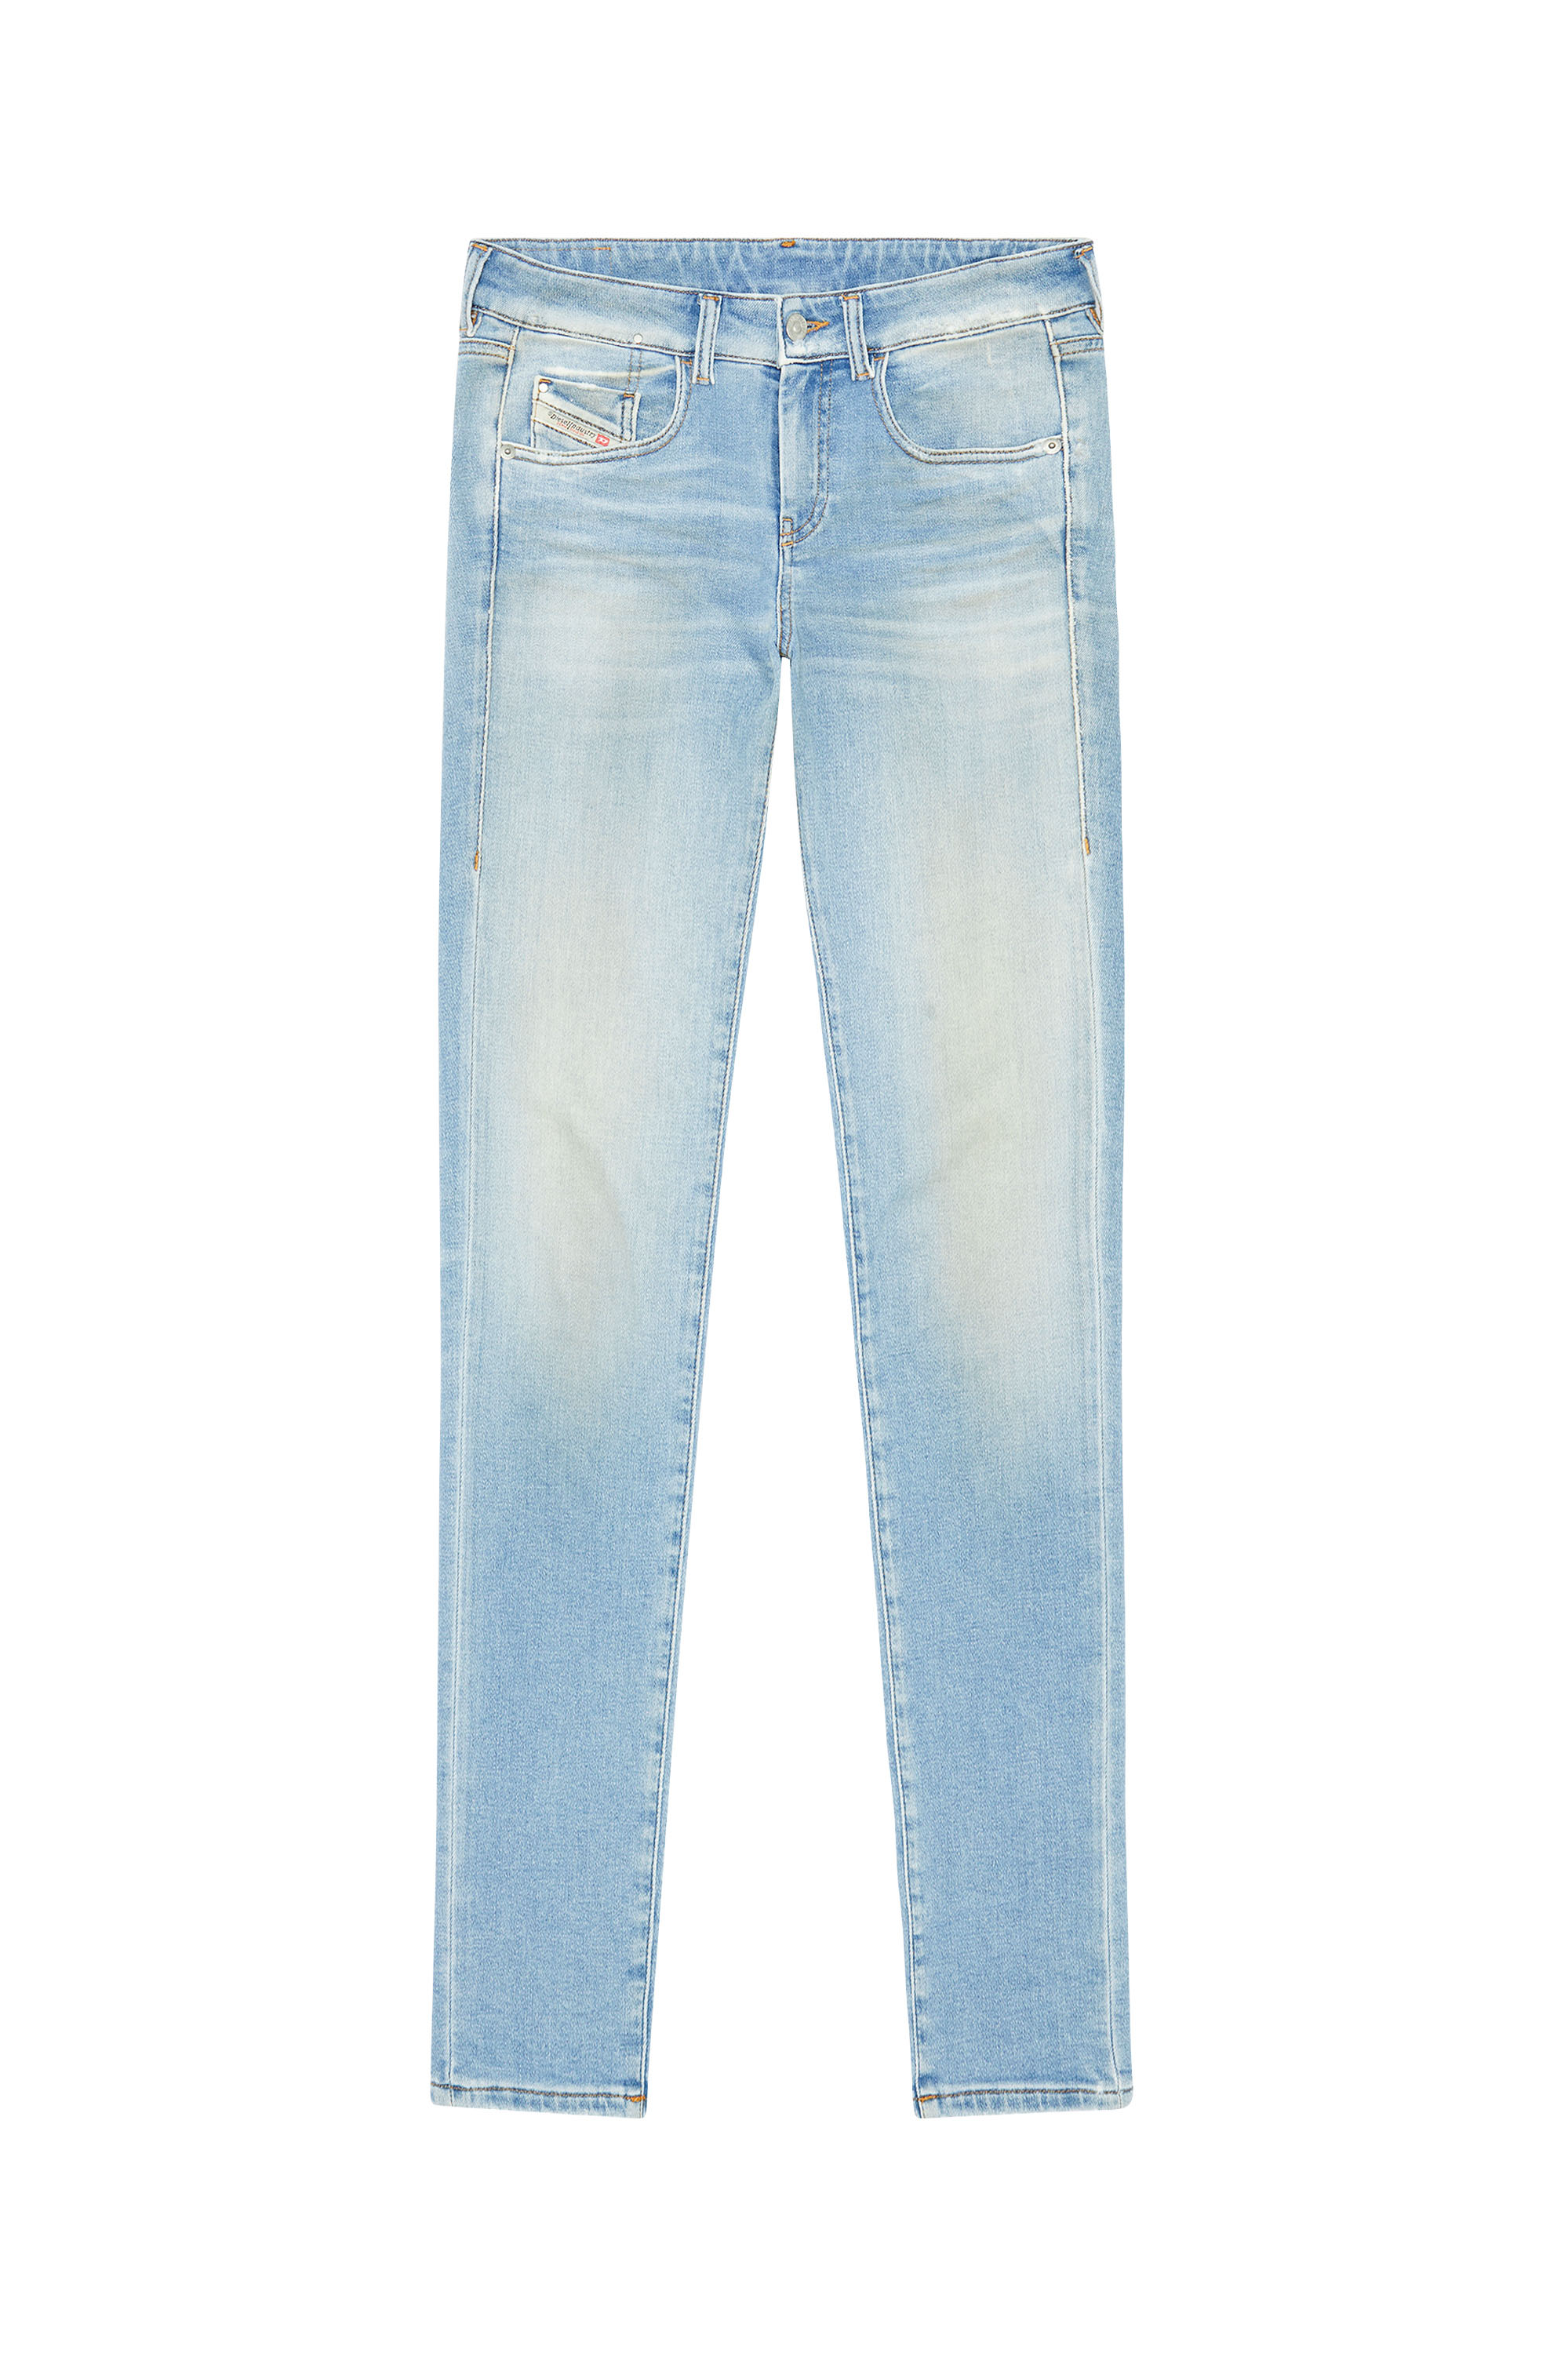 Women's JoggJeans®: High-waisted, baggy, tapered jeans | Diesel®